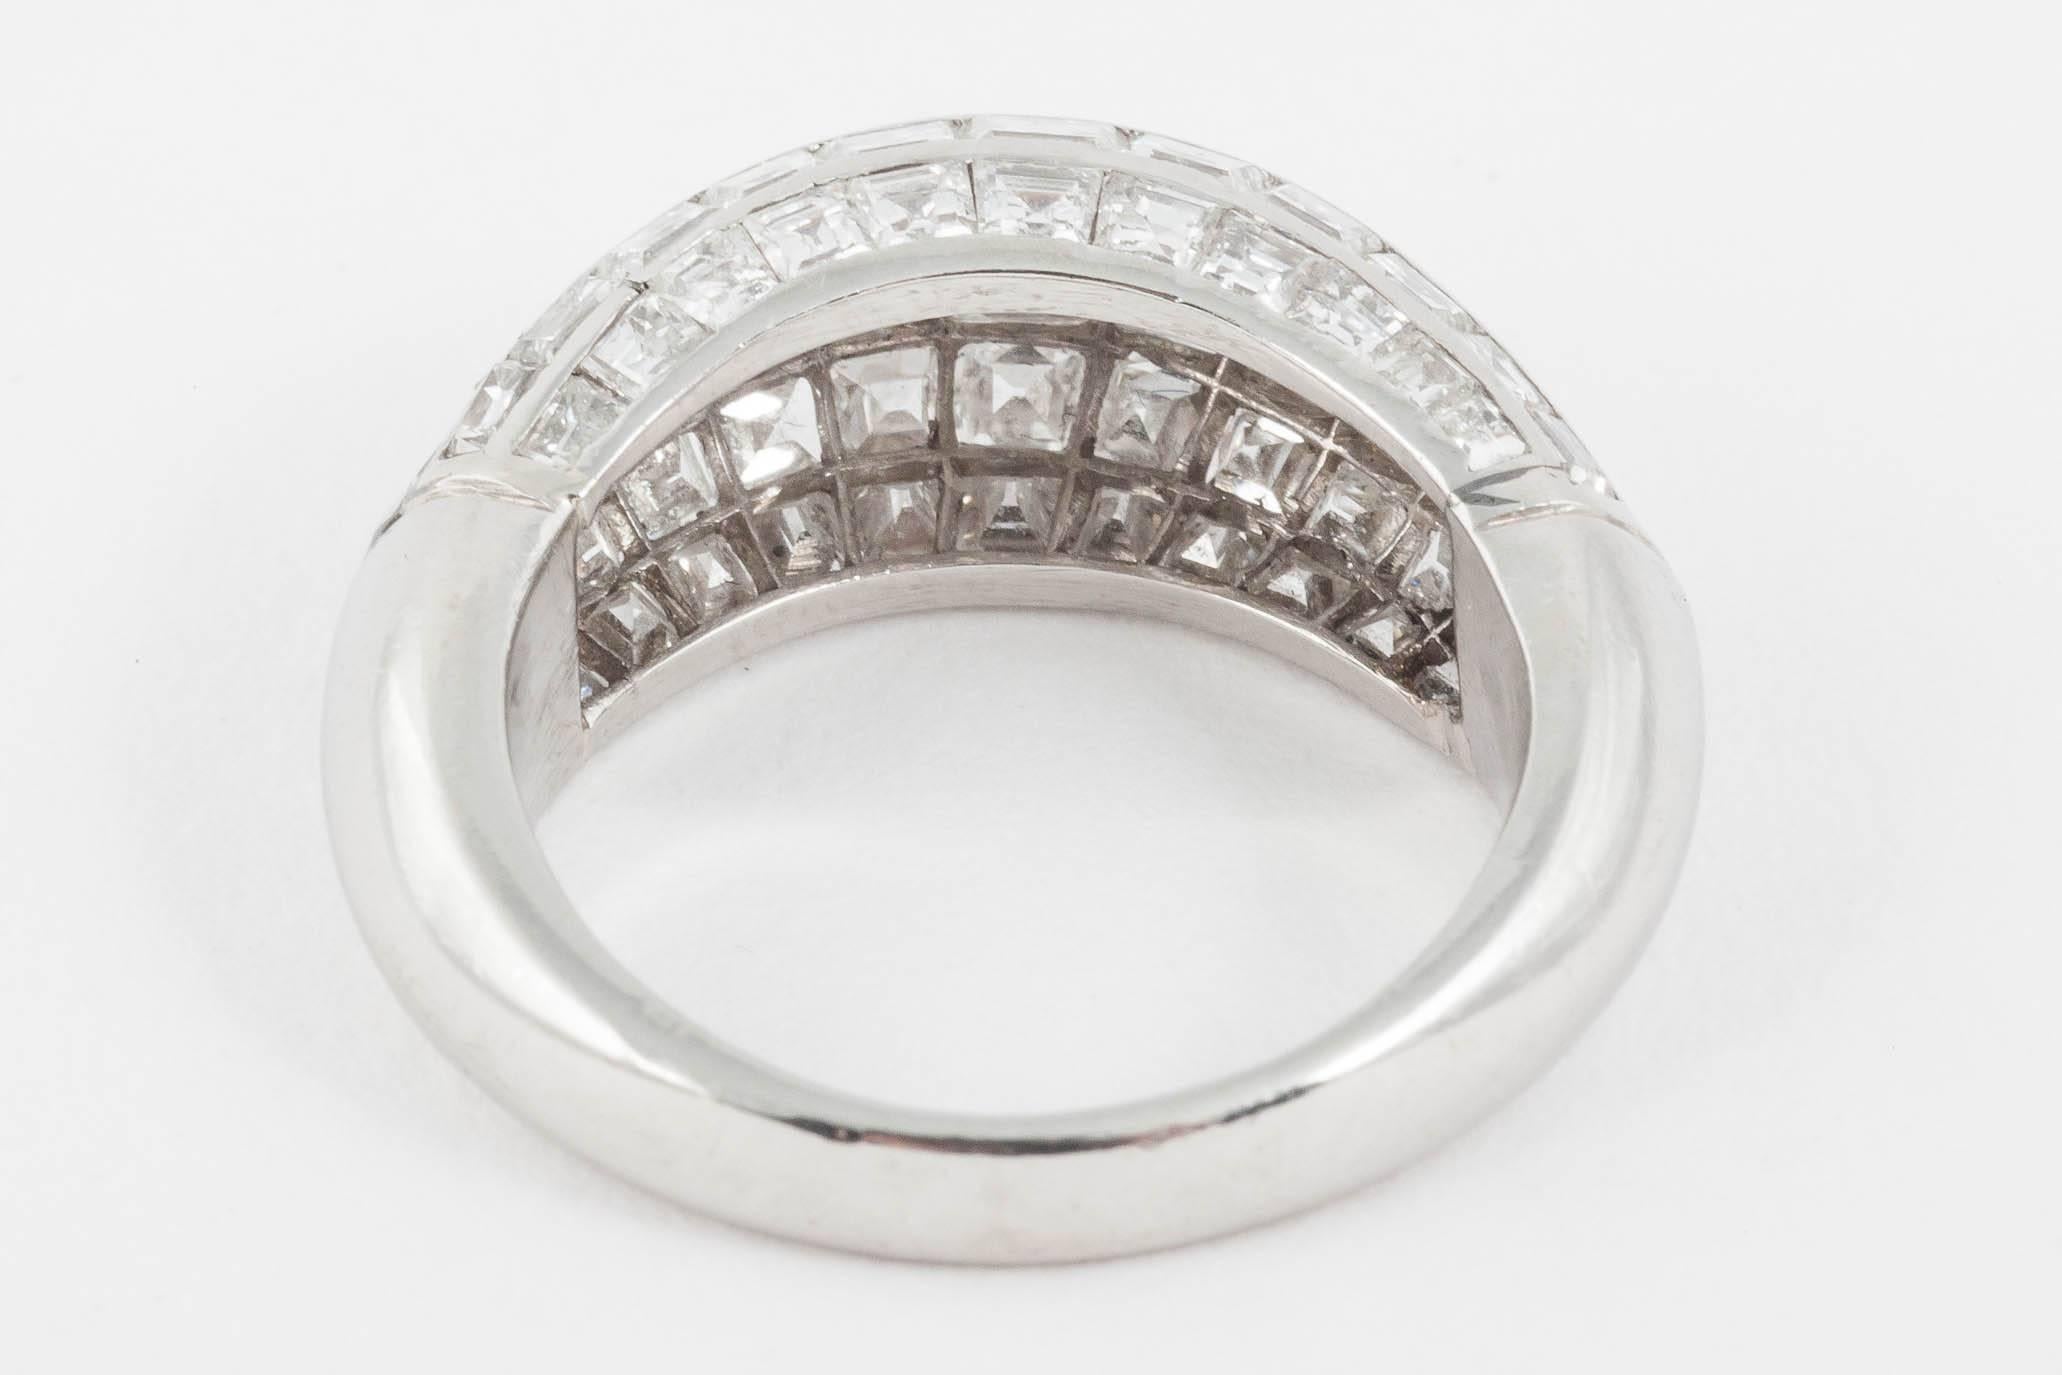 Domed Diamond Ring Set in Platinum In Excellent Condition For Sale In London, GB